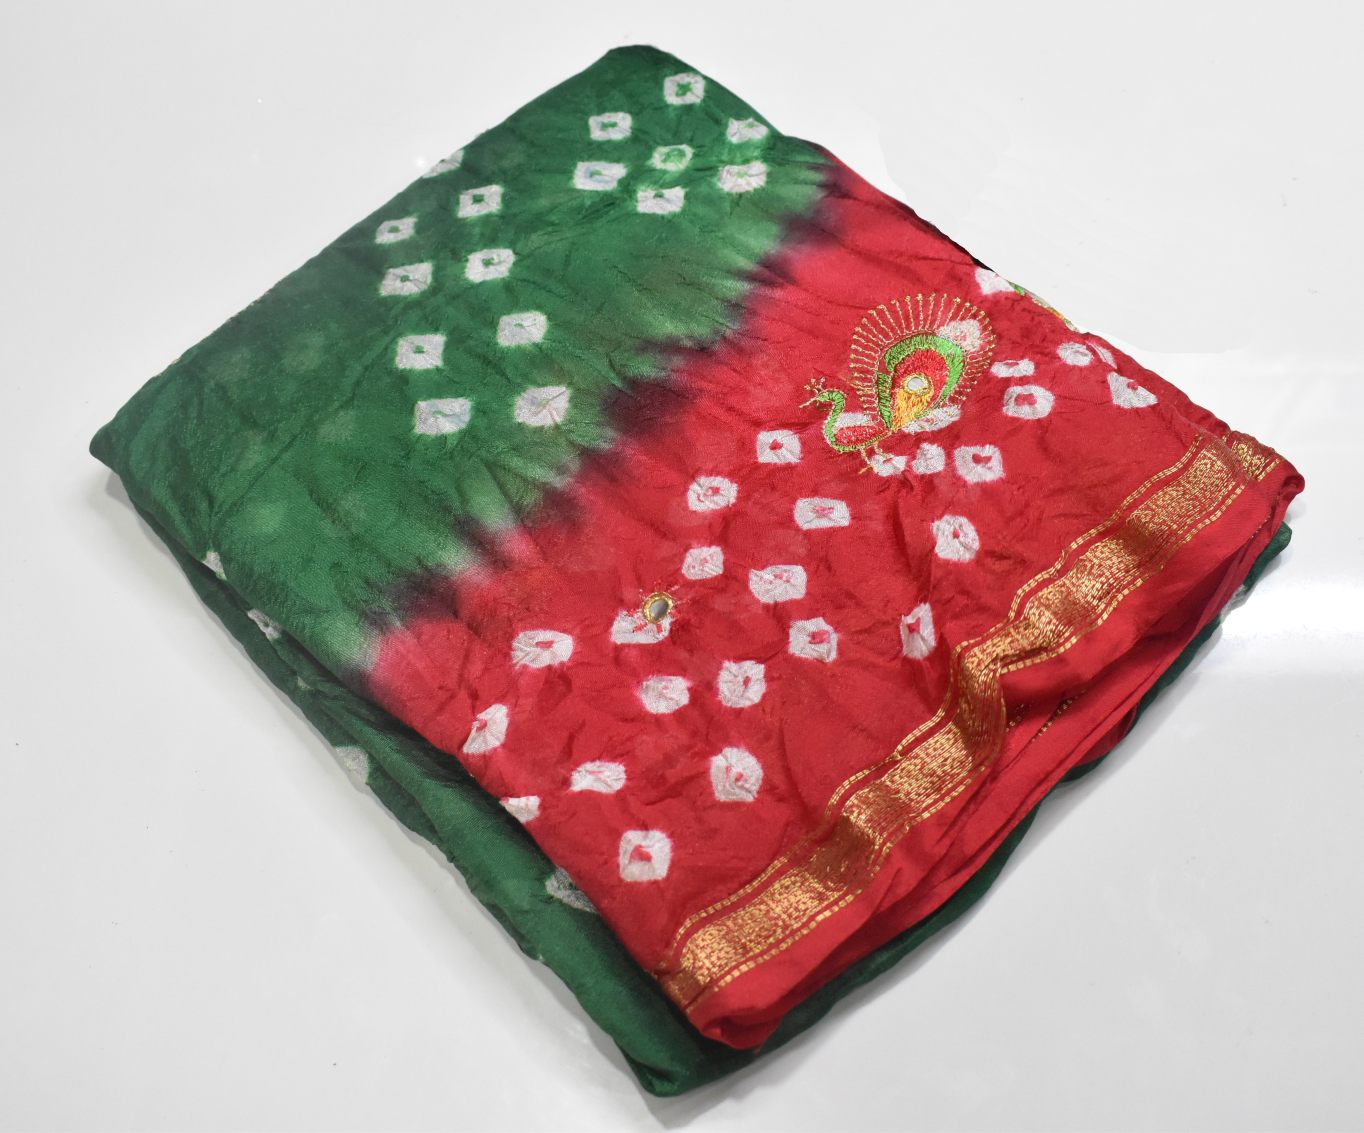 Bandhani Saree in bright green color body with red border